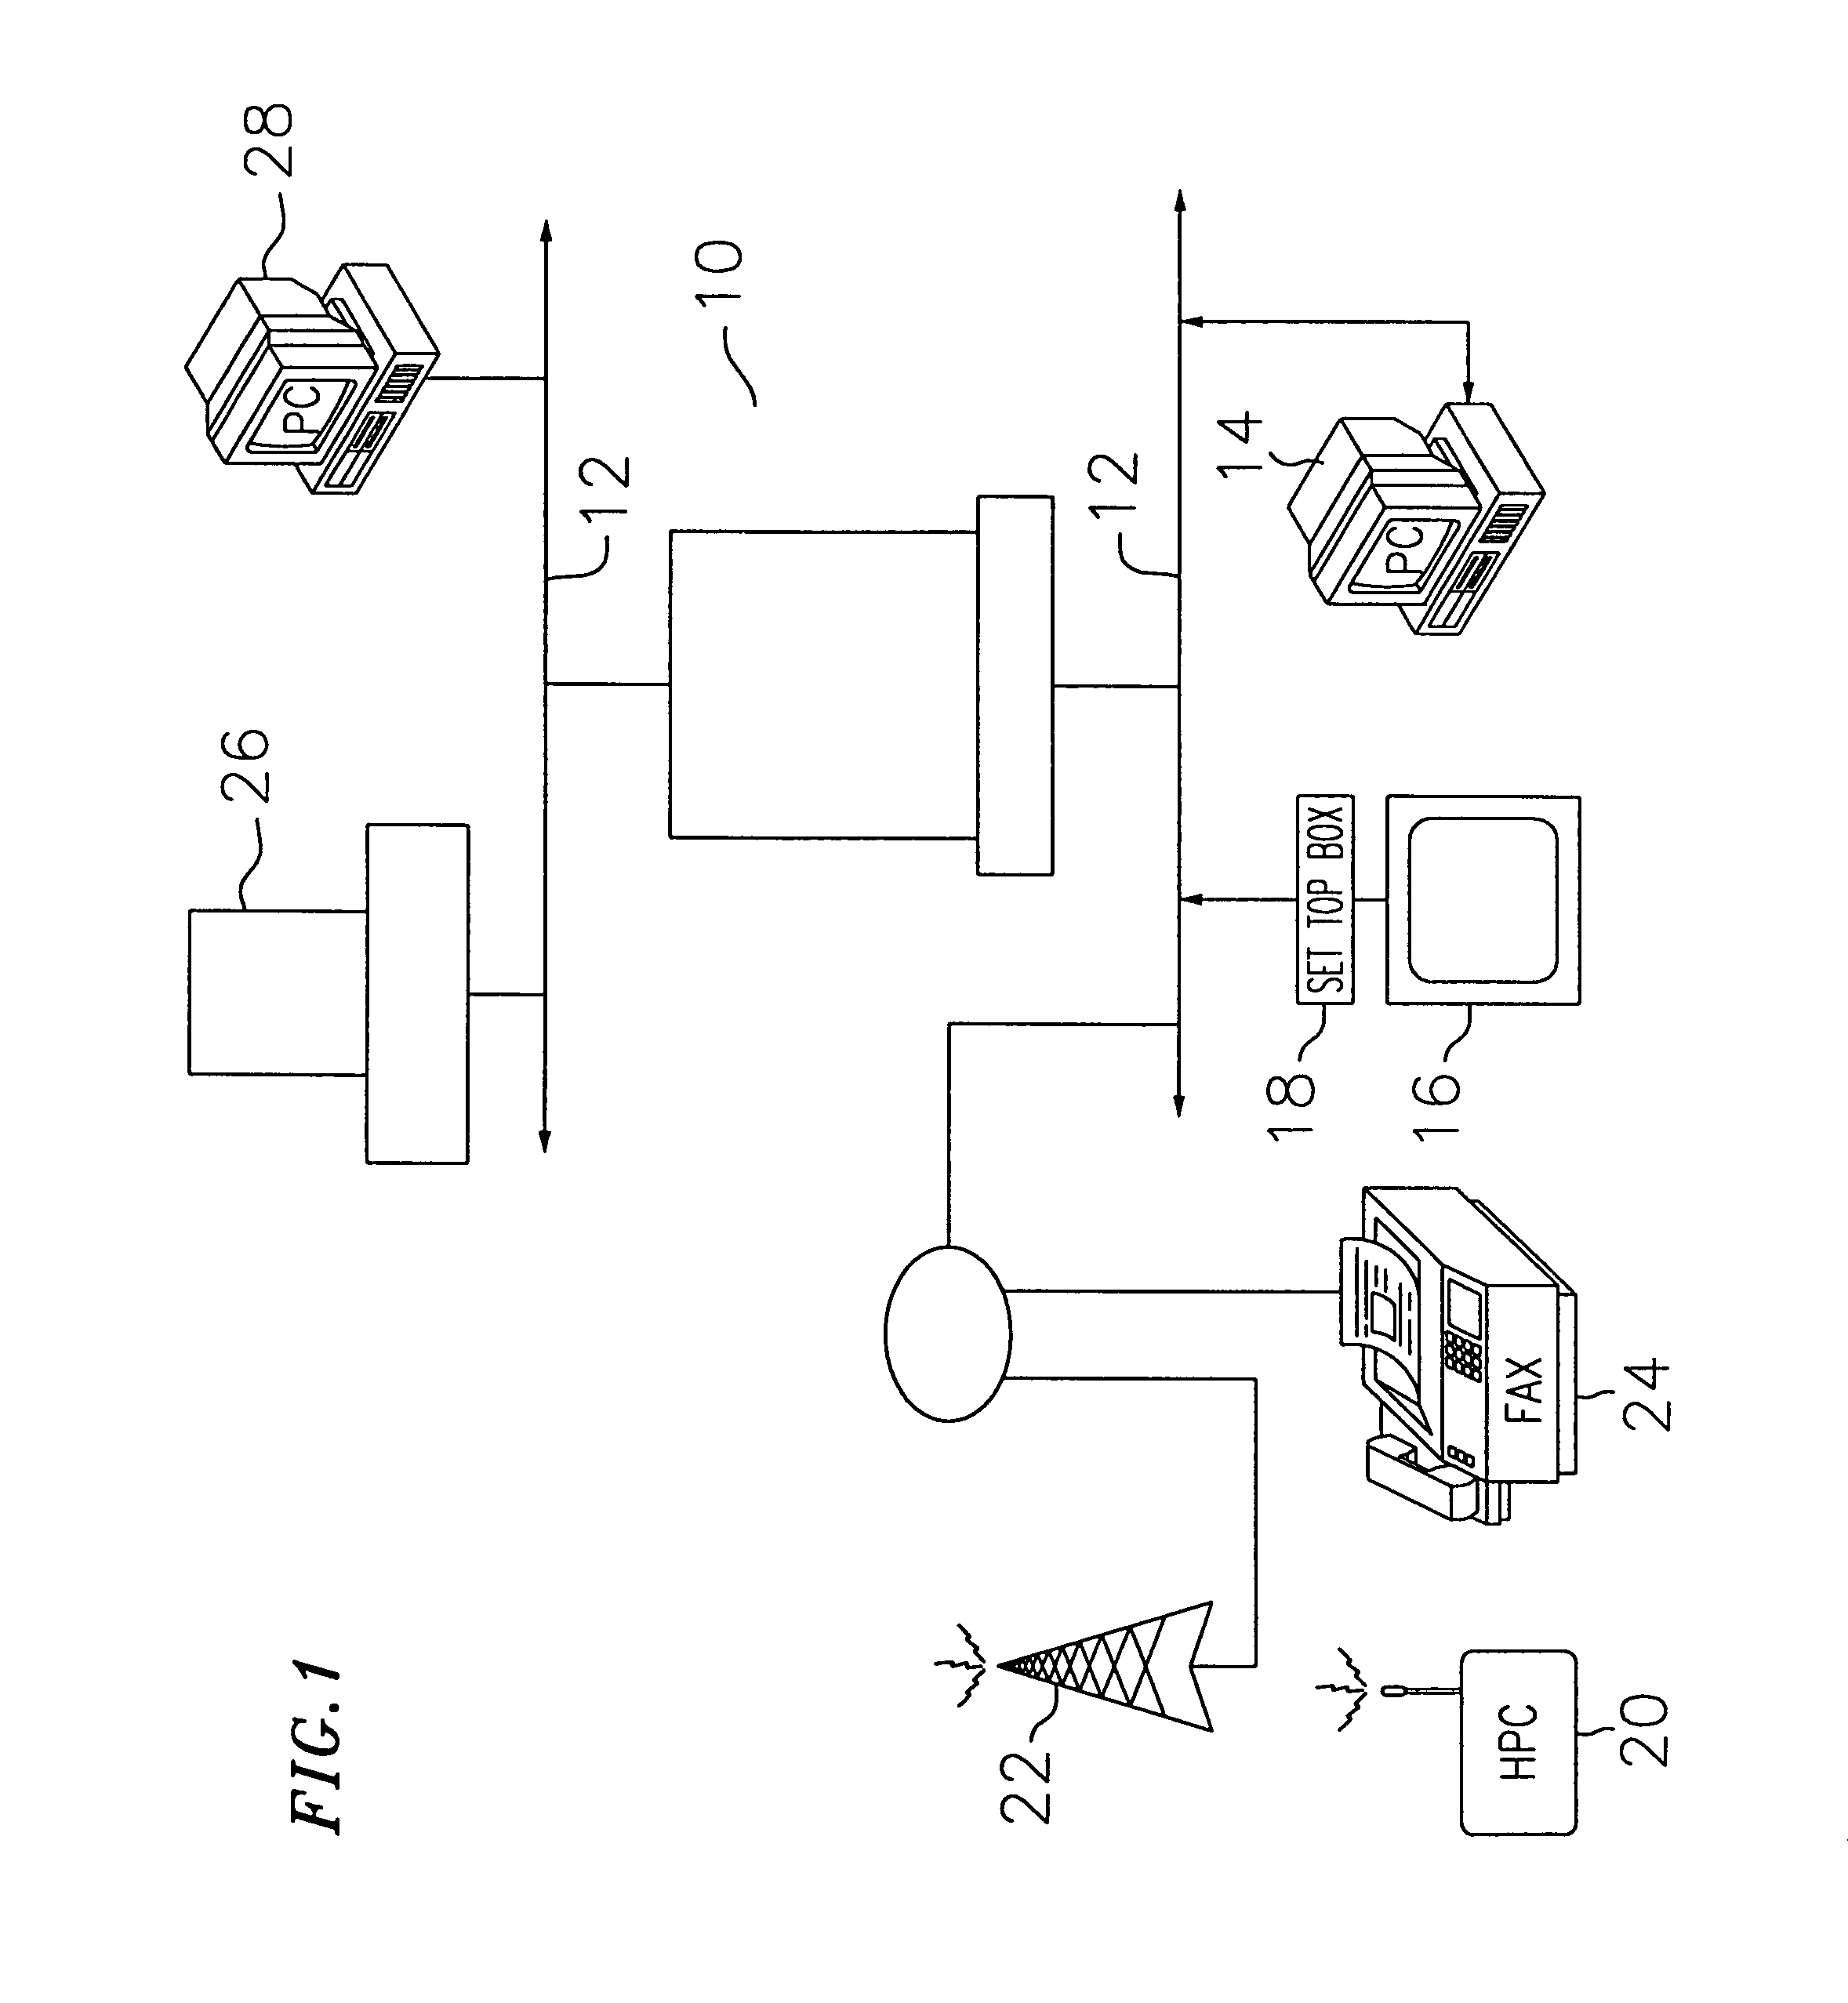 System and method for creating and submitting electronic shopping lists